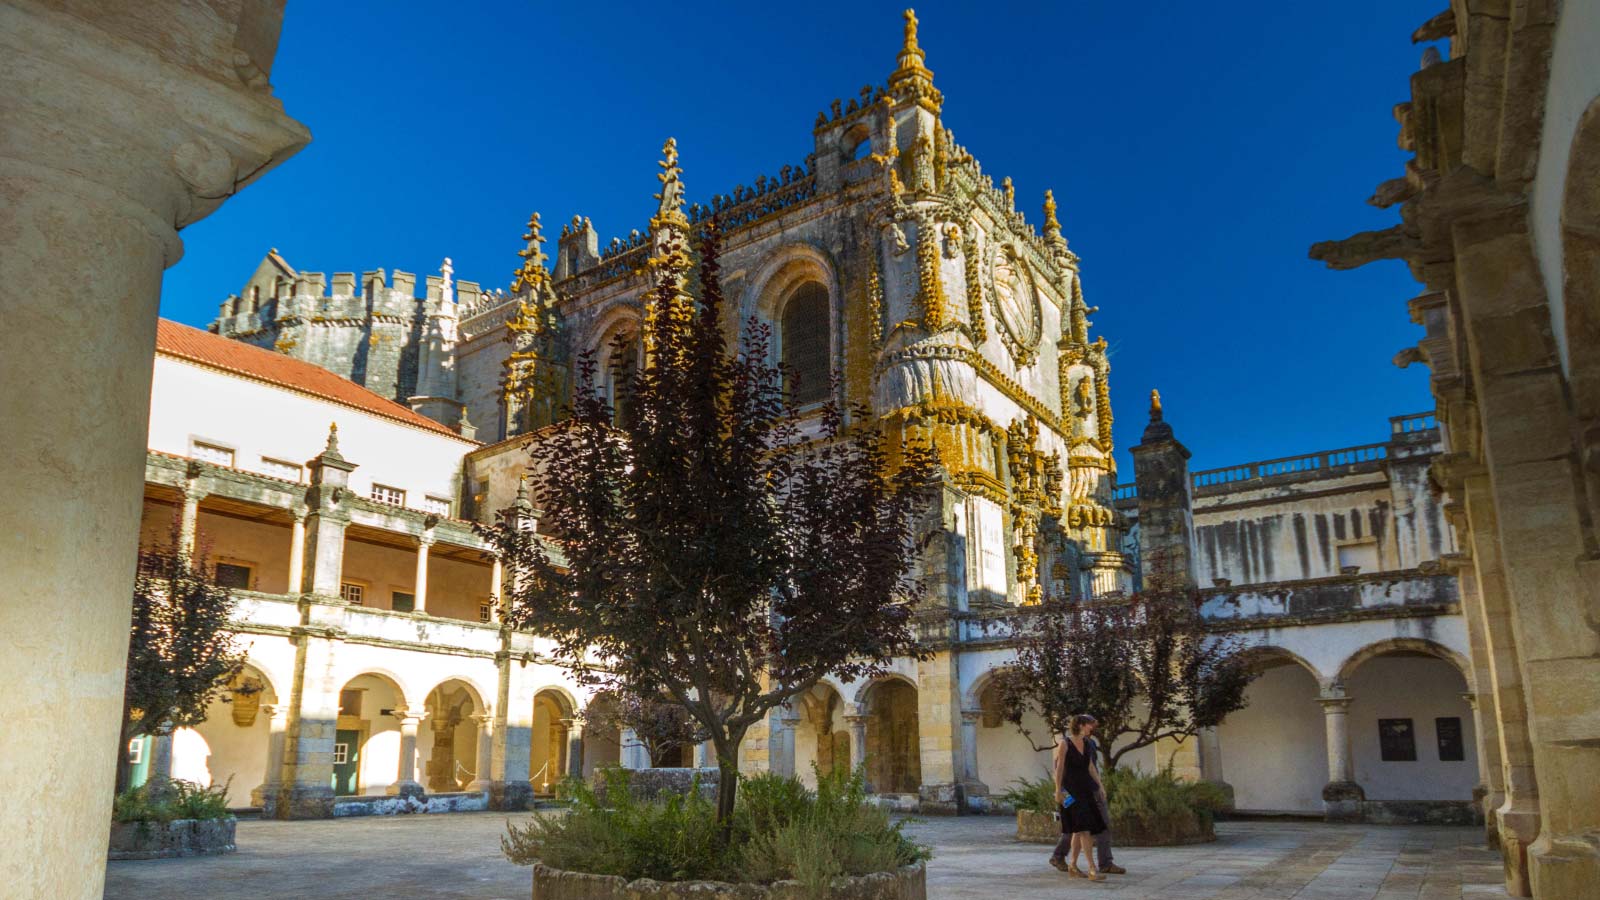 Can you visit the incredible cities of Alcobaca, Batalha, and Tomar in one day? Yes! We show you how to do it as a day trip from Lisbon Portugal